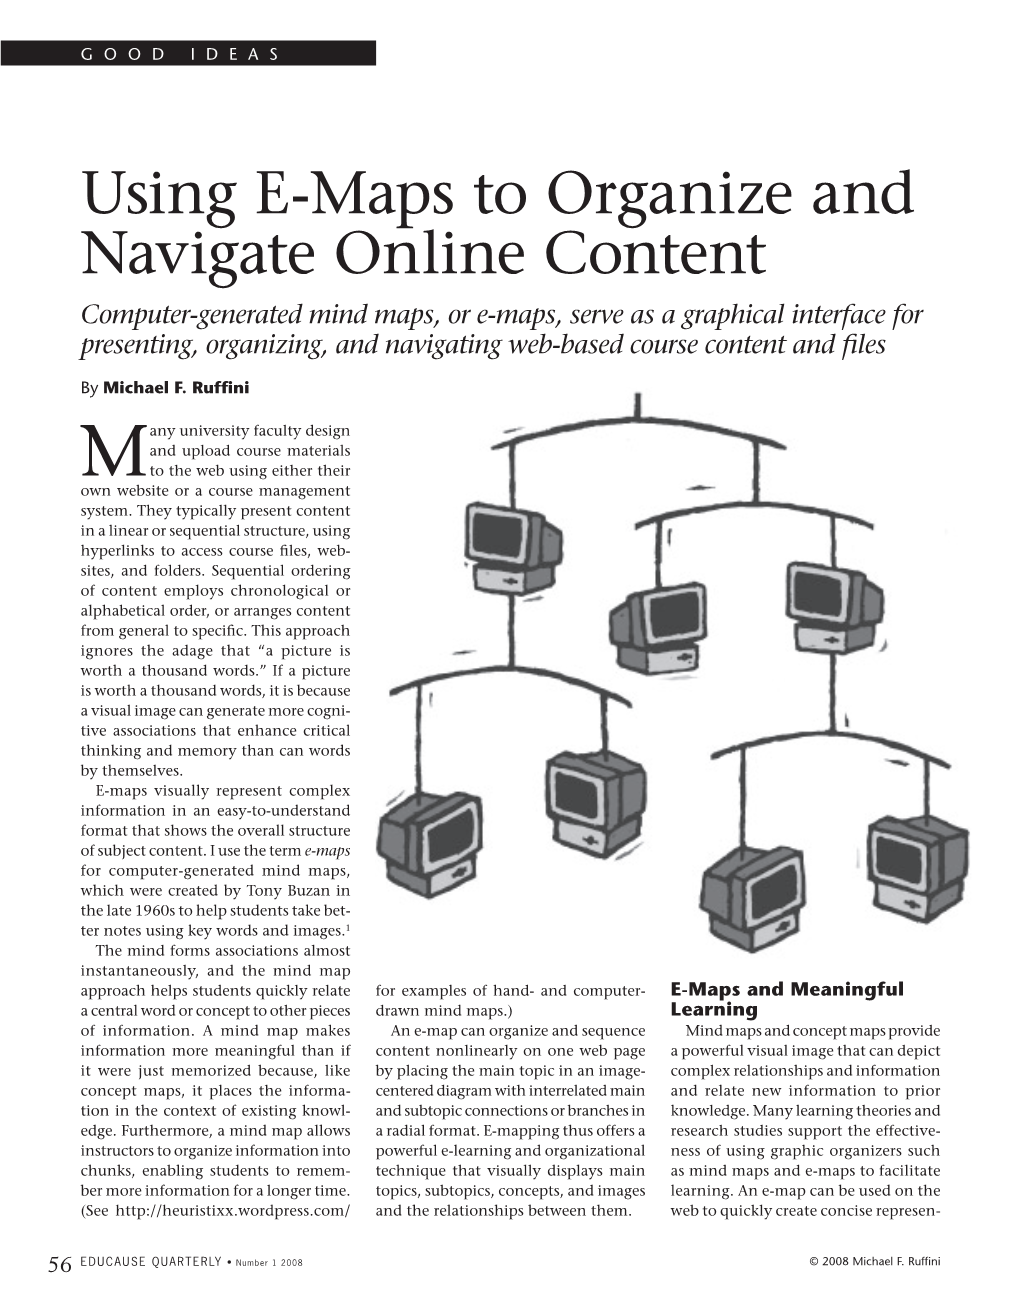 Using E-Maps to Organize and Navigate Online Content